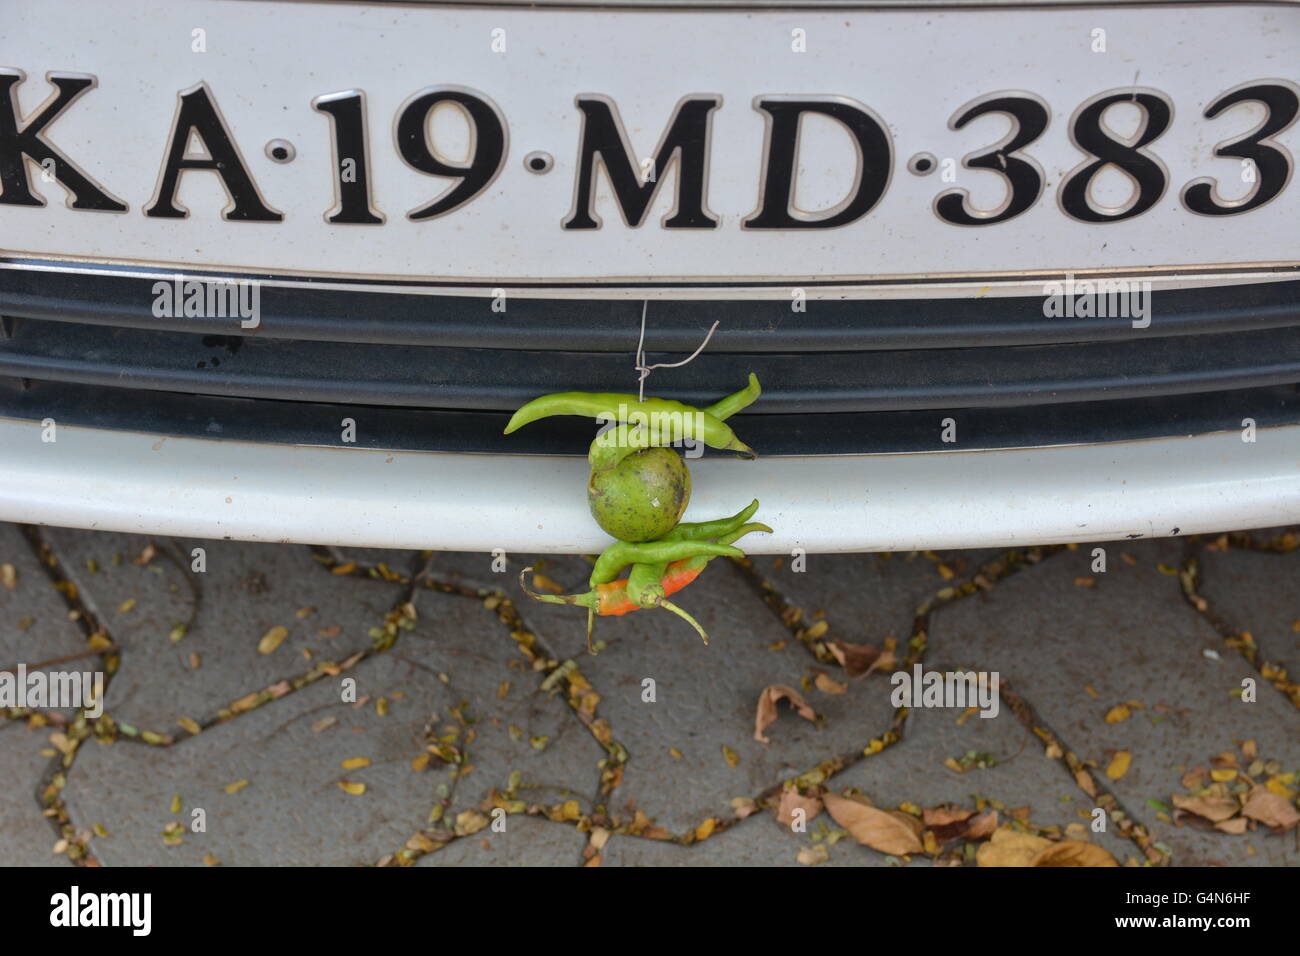 Kochi, India - October 24, 2015 - Chili and lemon on Tata car in India as part of superstition to prevent car accidents Stock Photo